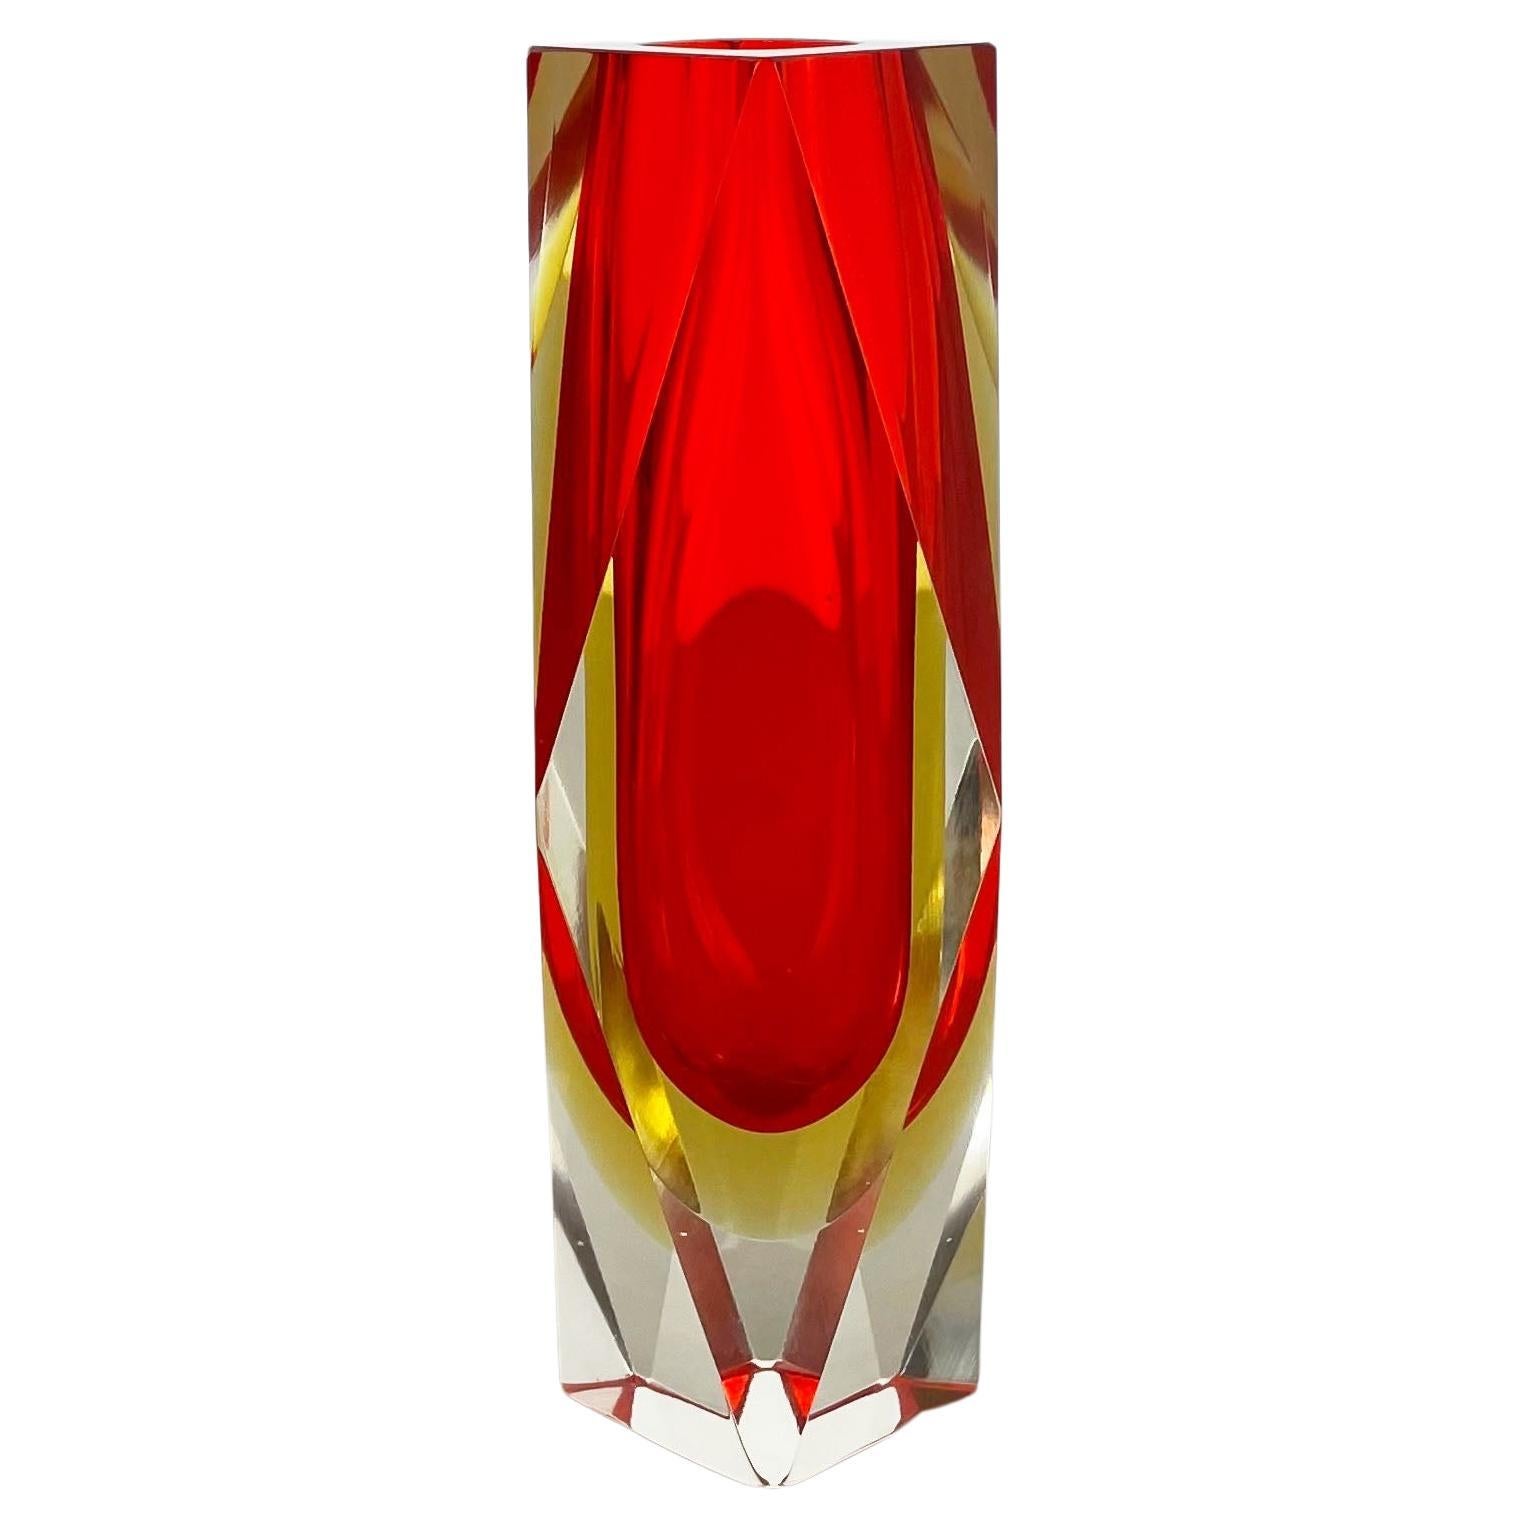 Large Red Murano Glass Sommerso Vase by Flavio Poli Attributed, Italy 1970s For Sale